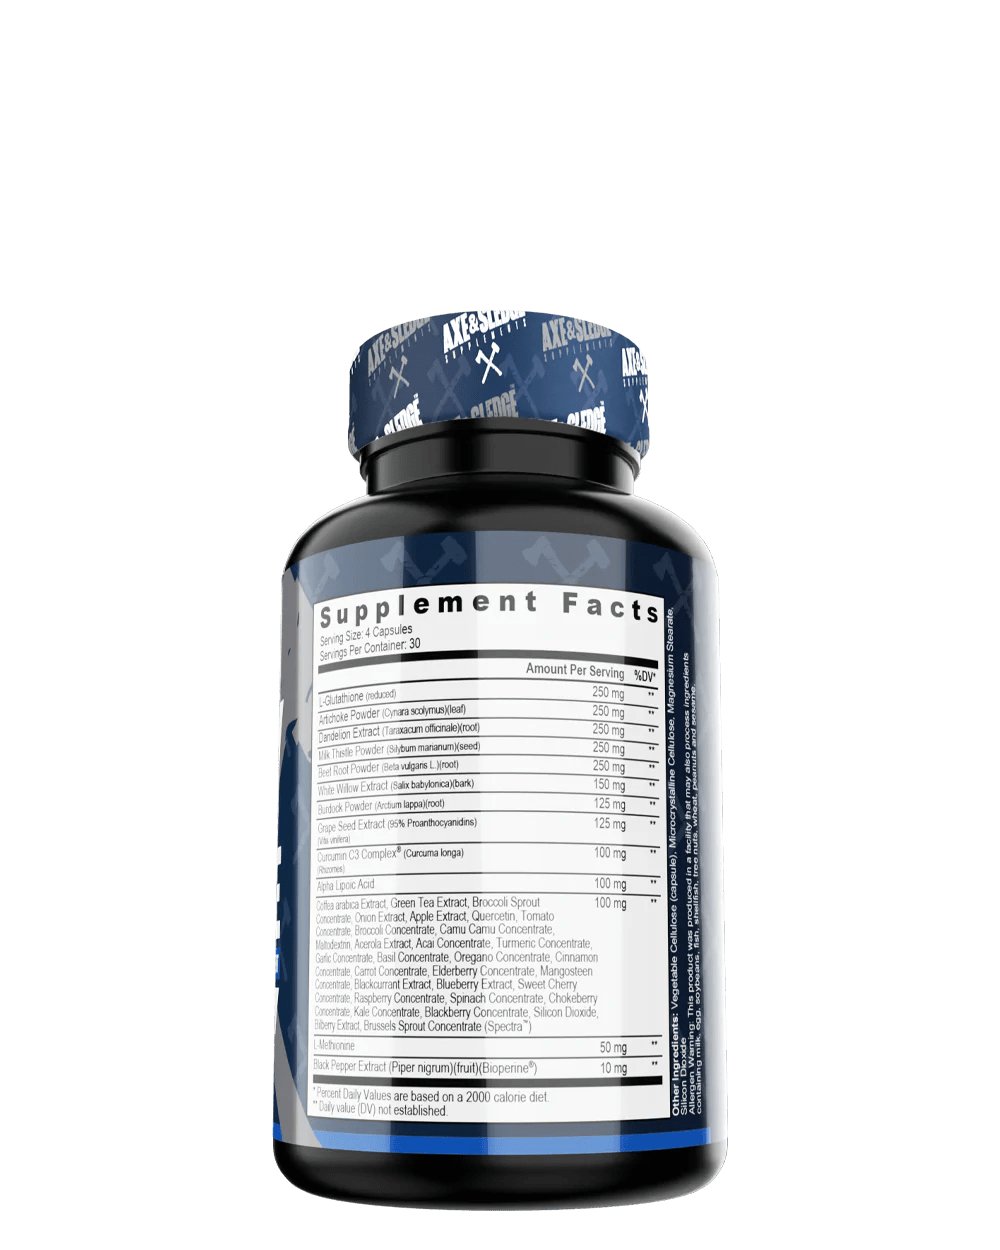 AXE & SLEDGEDaily Cleanse - Antioxidant & Anti-Inflammatory AgentAntioxidant & Anti-Inflammatory AgentRED SUPPS